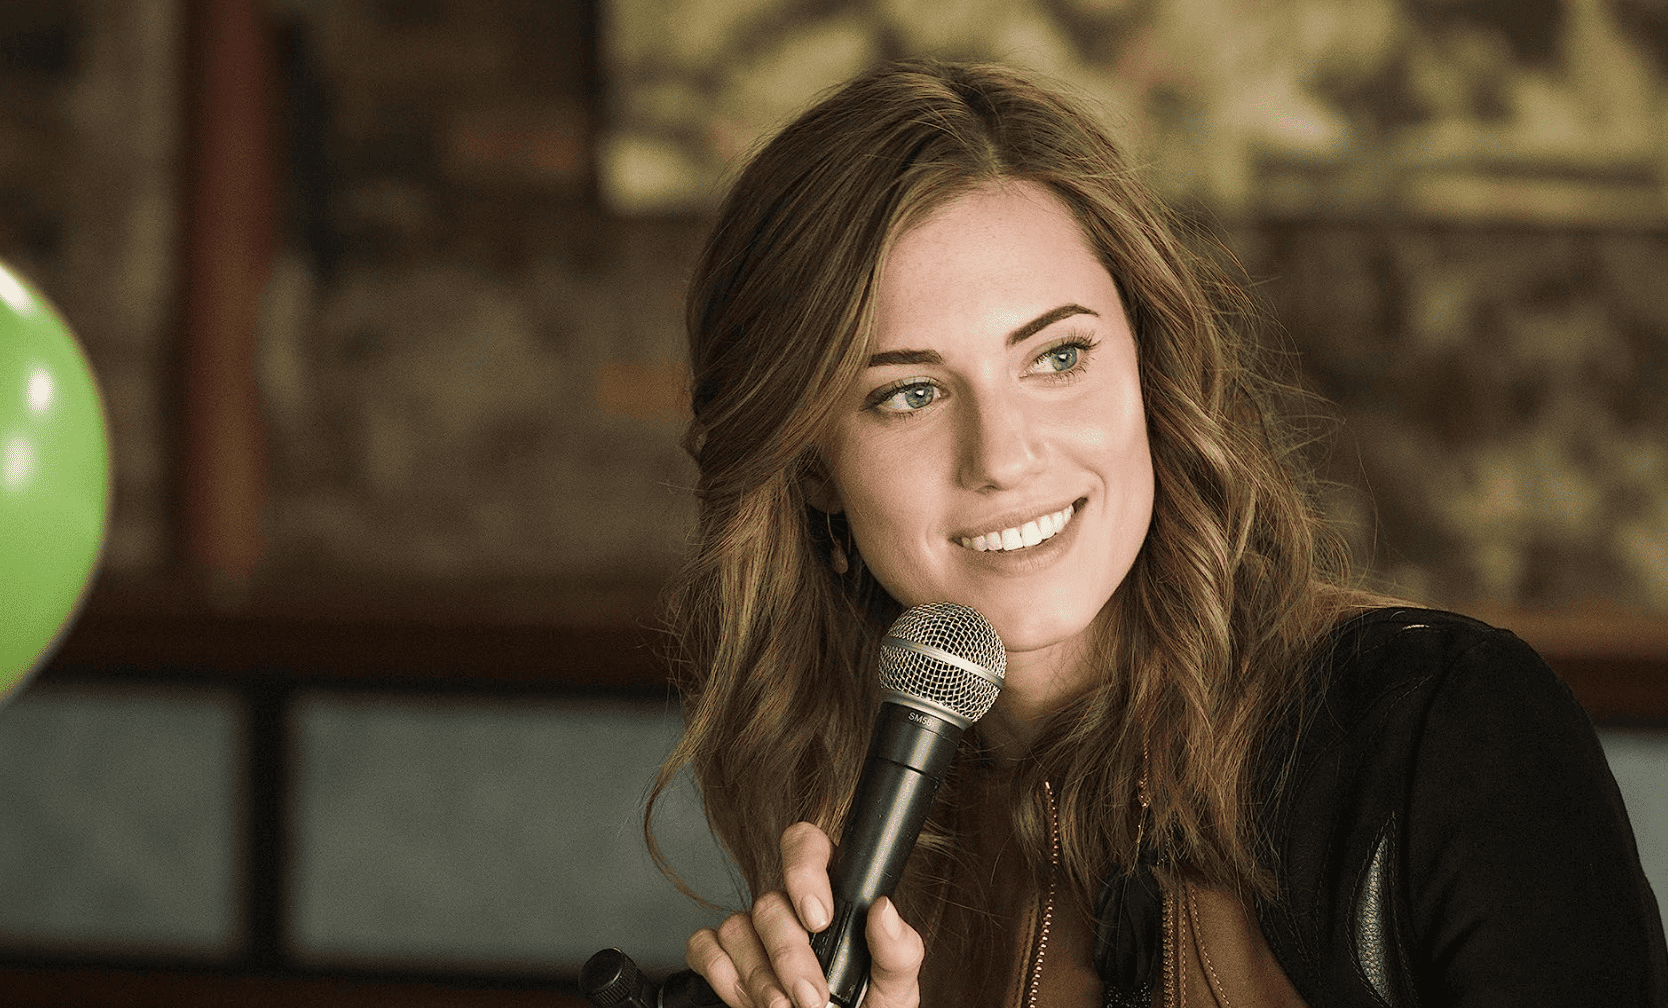 Allison Williams in her role as Marnie holding a microphone mid-conversation in front of an off-camera crowd in this image from Apatow Productions